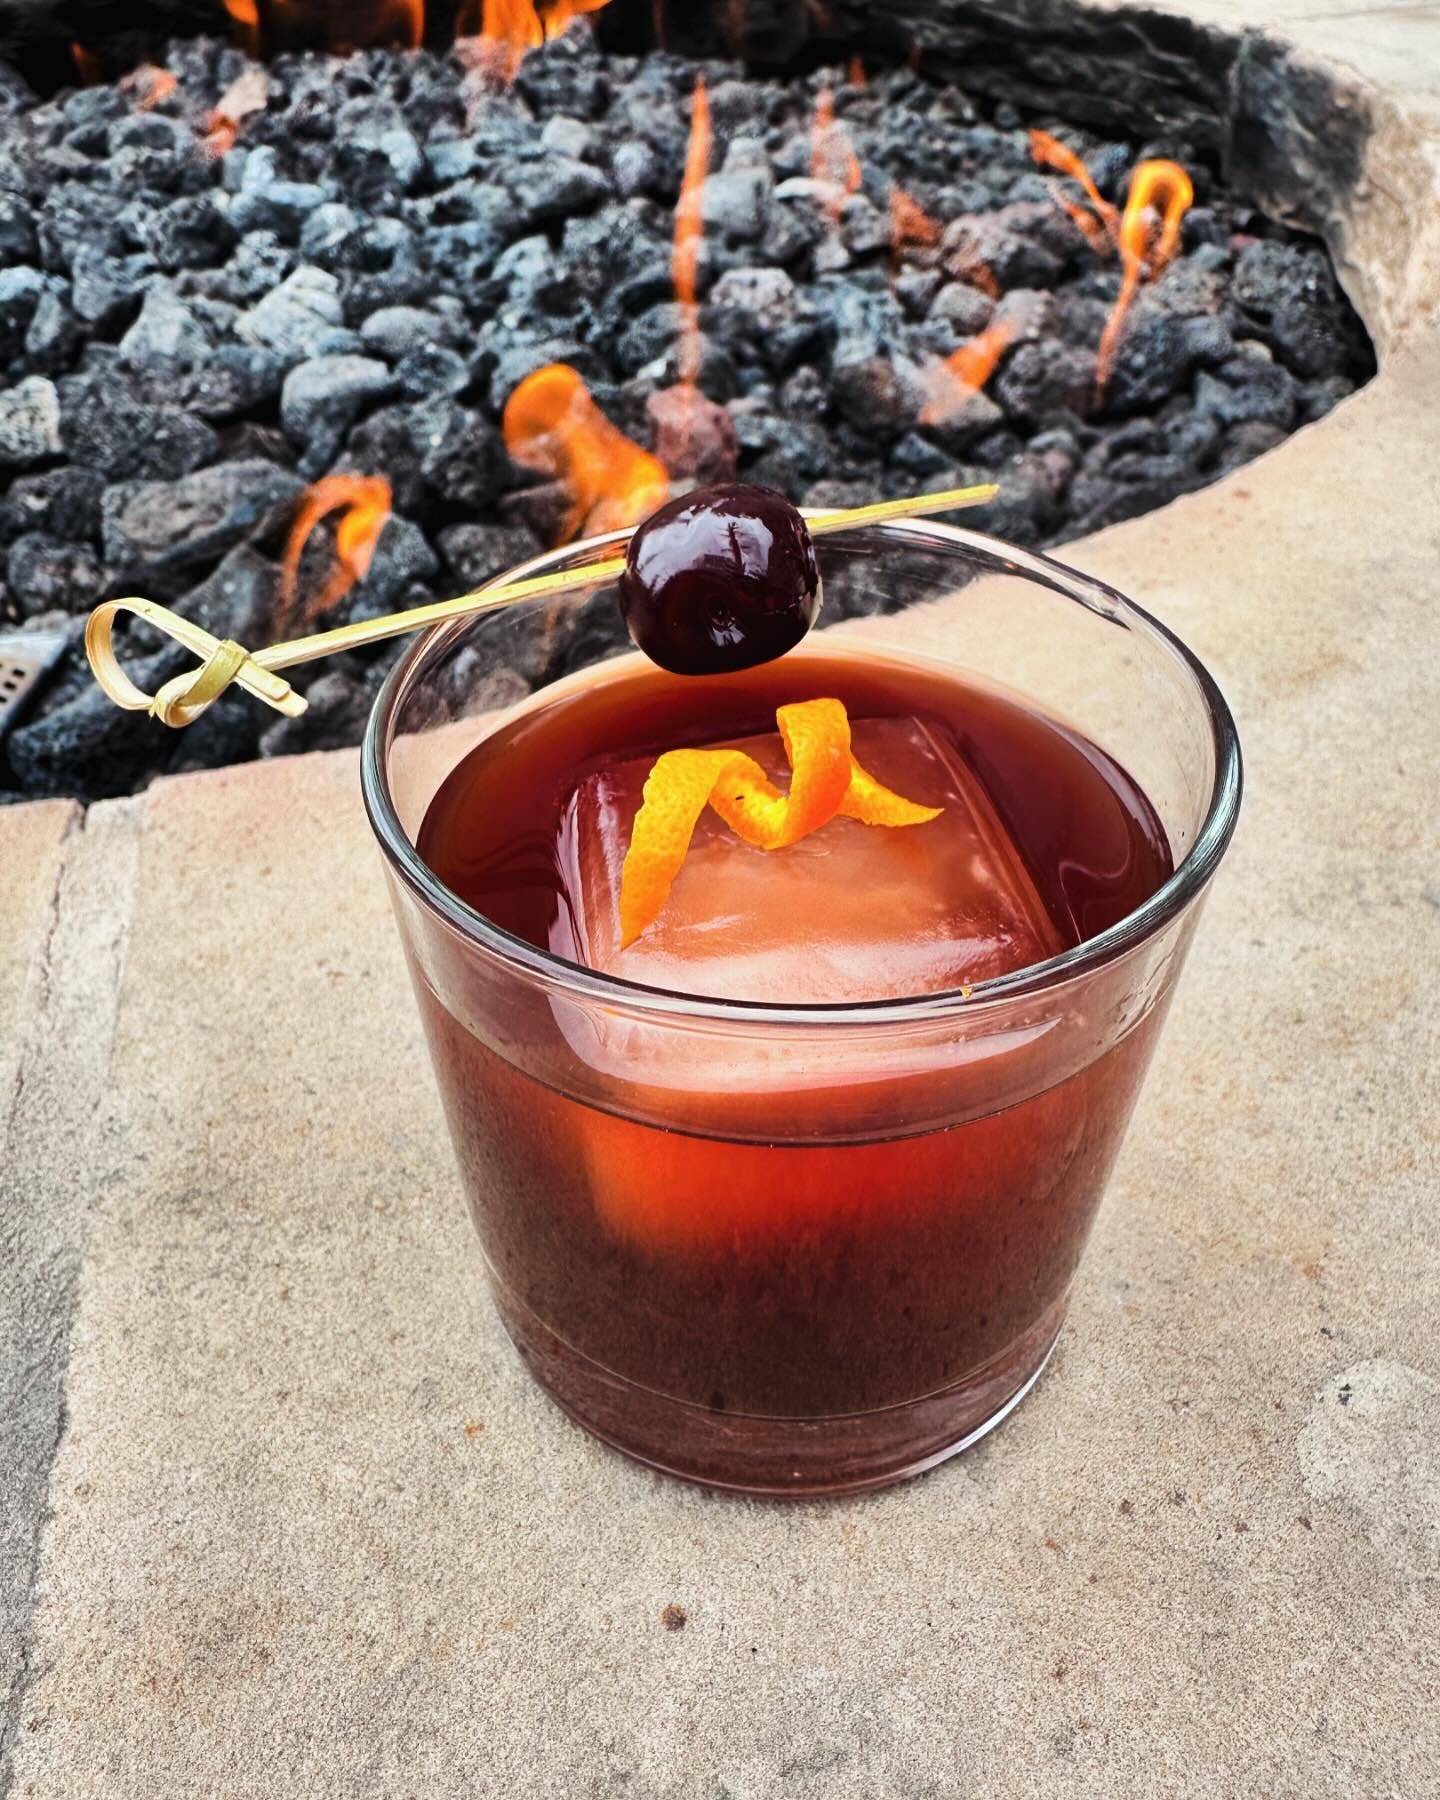 New mocktail alert! Smokey Cherry Chocolate n/a Old Fashioned. Also known as a zero-proof cocktail, because our mocktails get just as much love as our cocktails. 🥃 #naoldfashioned #smokeycherry 🍒 #mocktails🍹 #newonthelist #treelinekitchenleadville